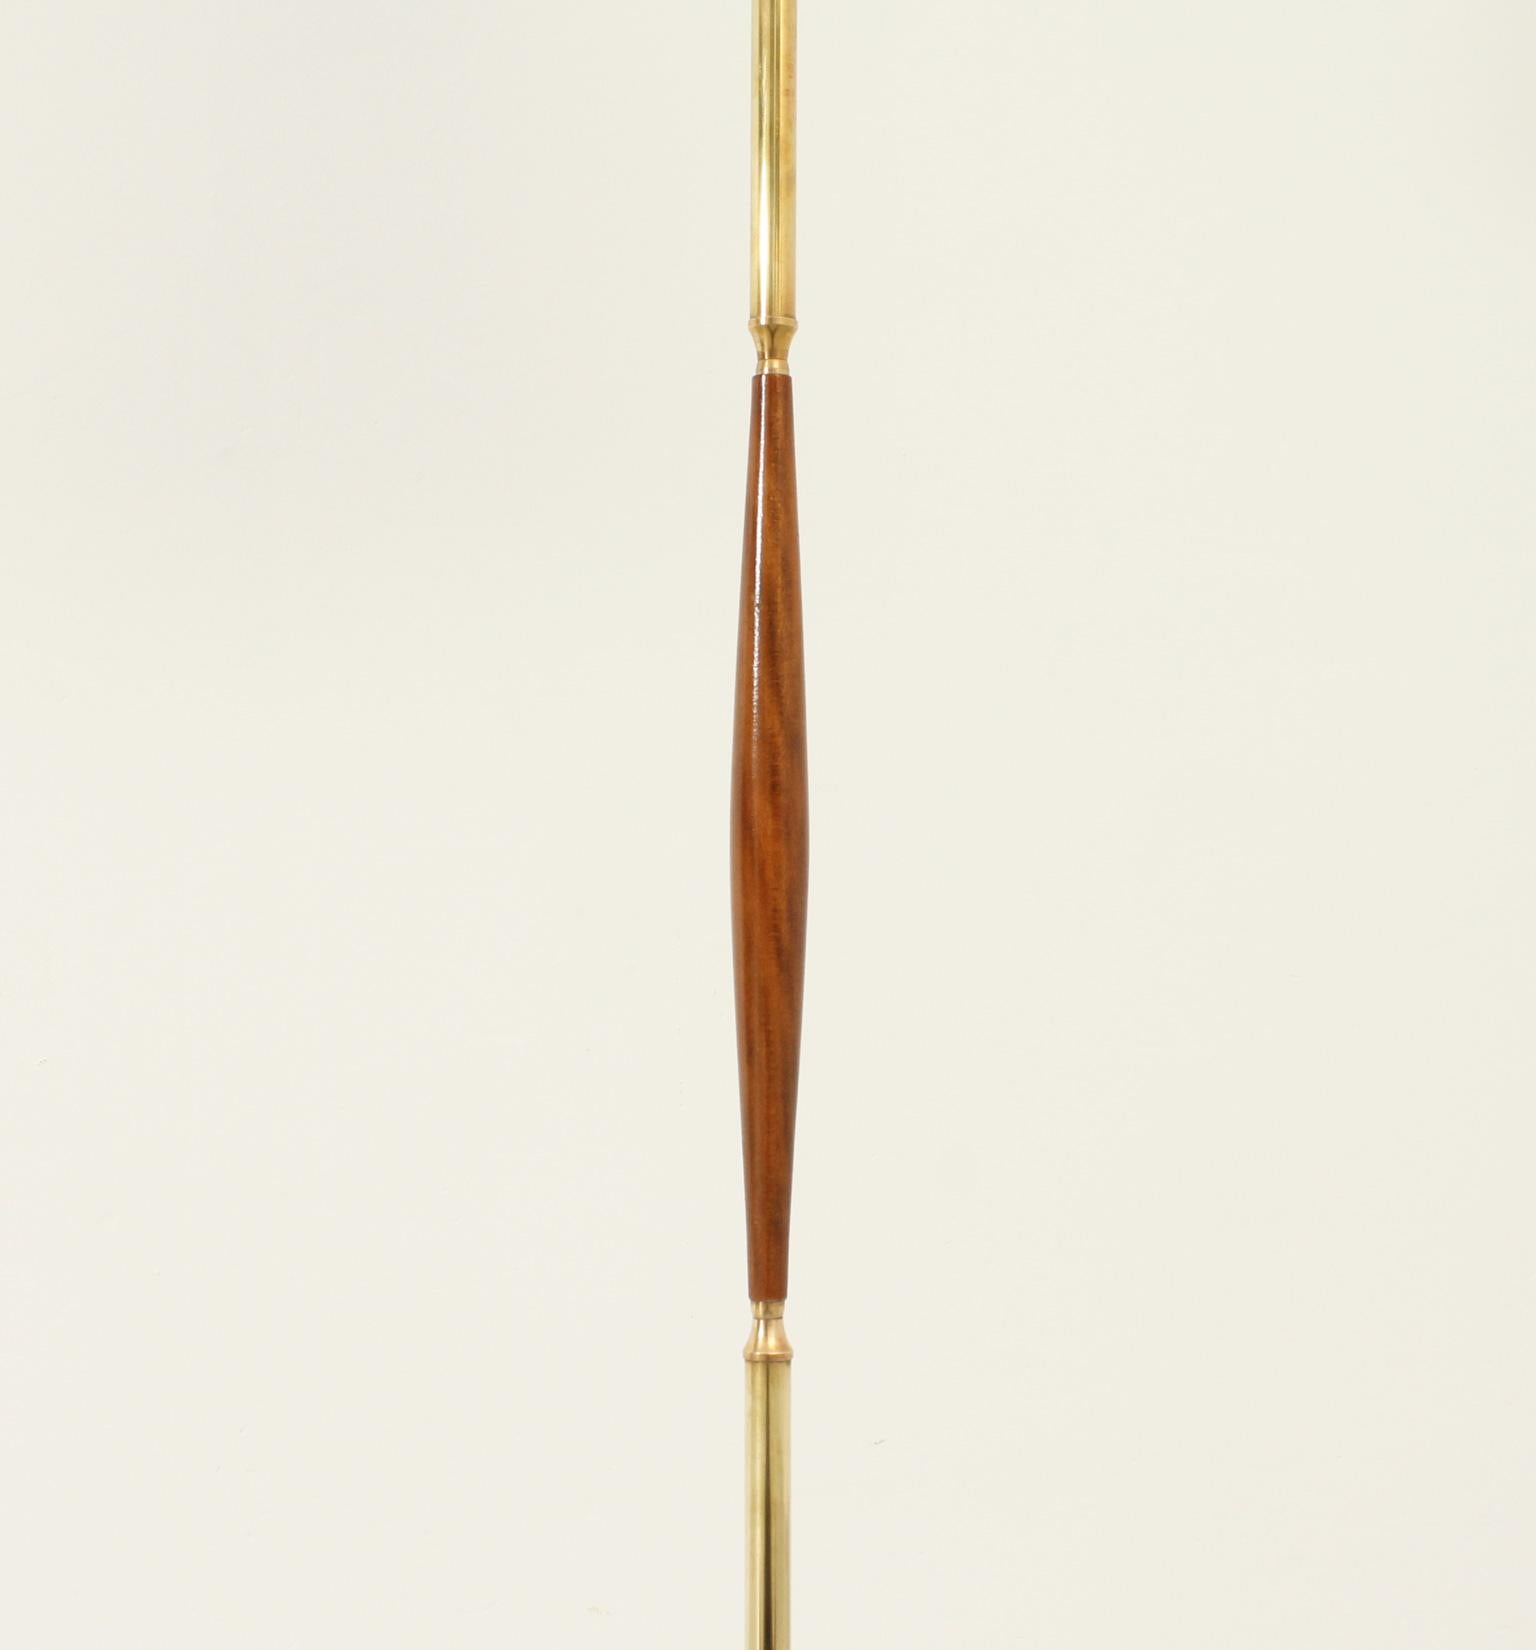 Spanish Floor Lamp in Brass and Walnut Wood from 1950s For Sale 2